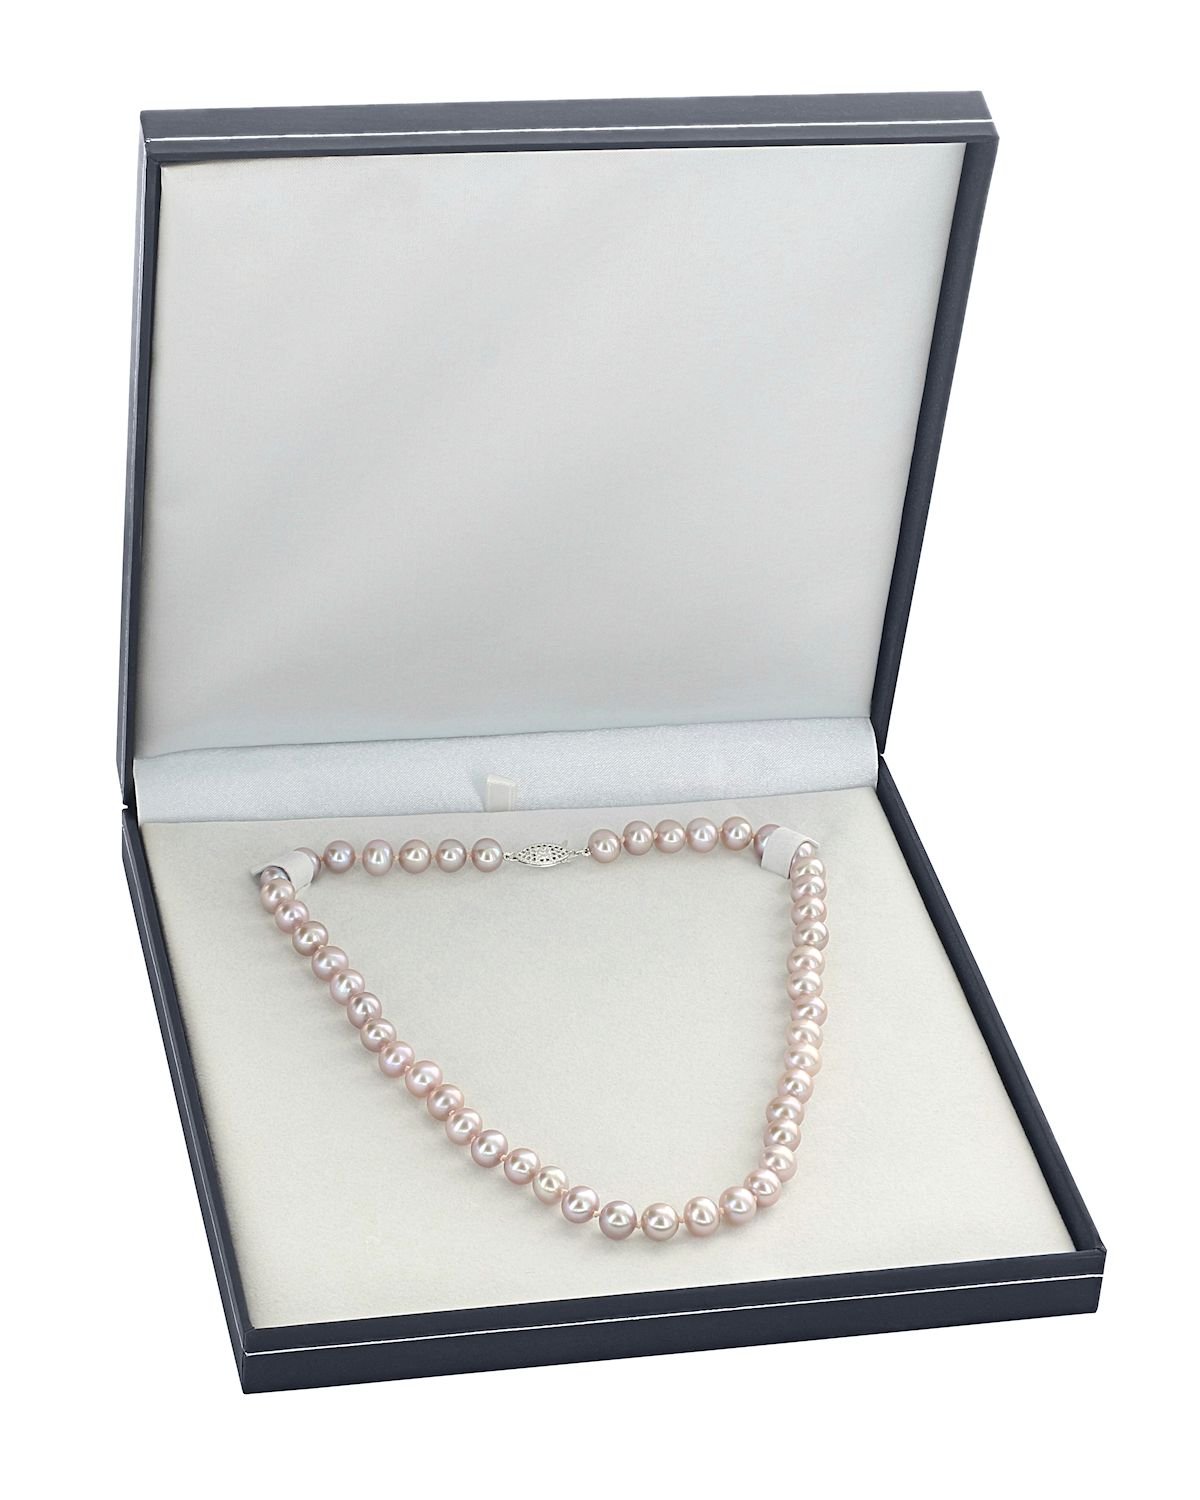 8.0-8.5mm Peach Freshwater Pearl Necklace - AAA Quality - Third Image